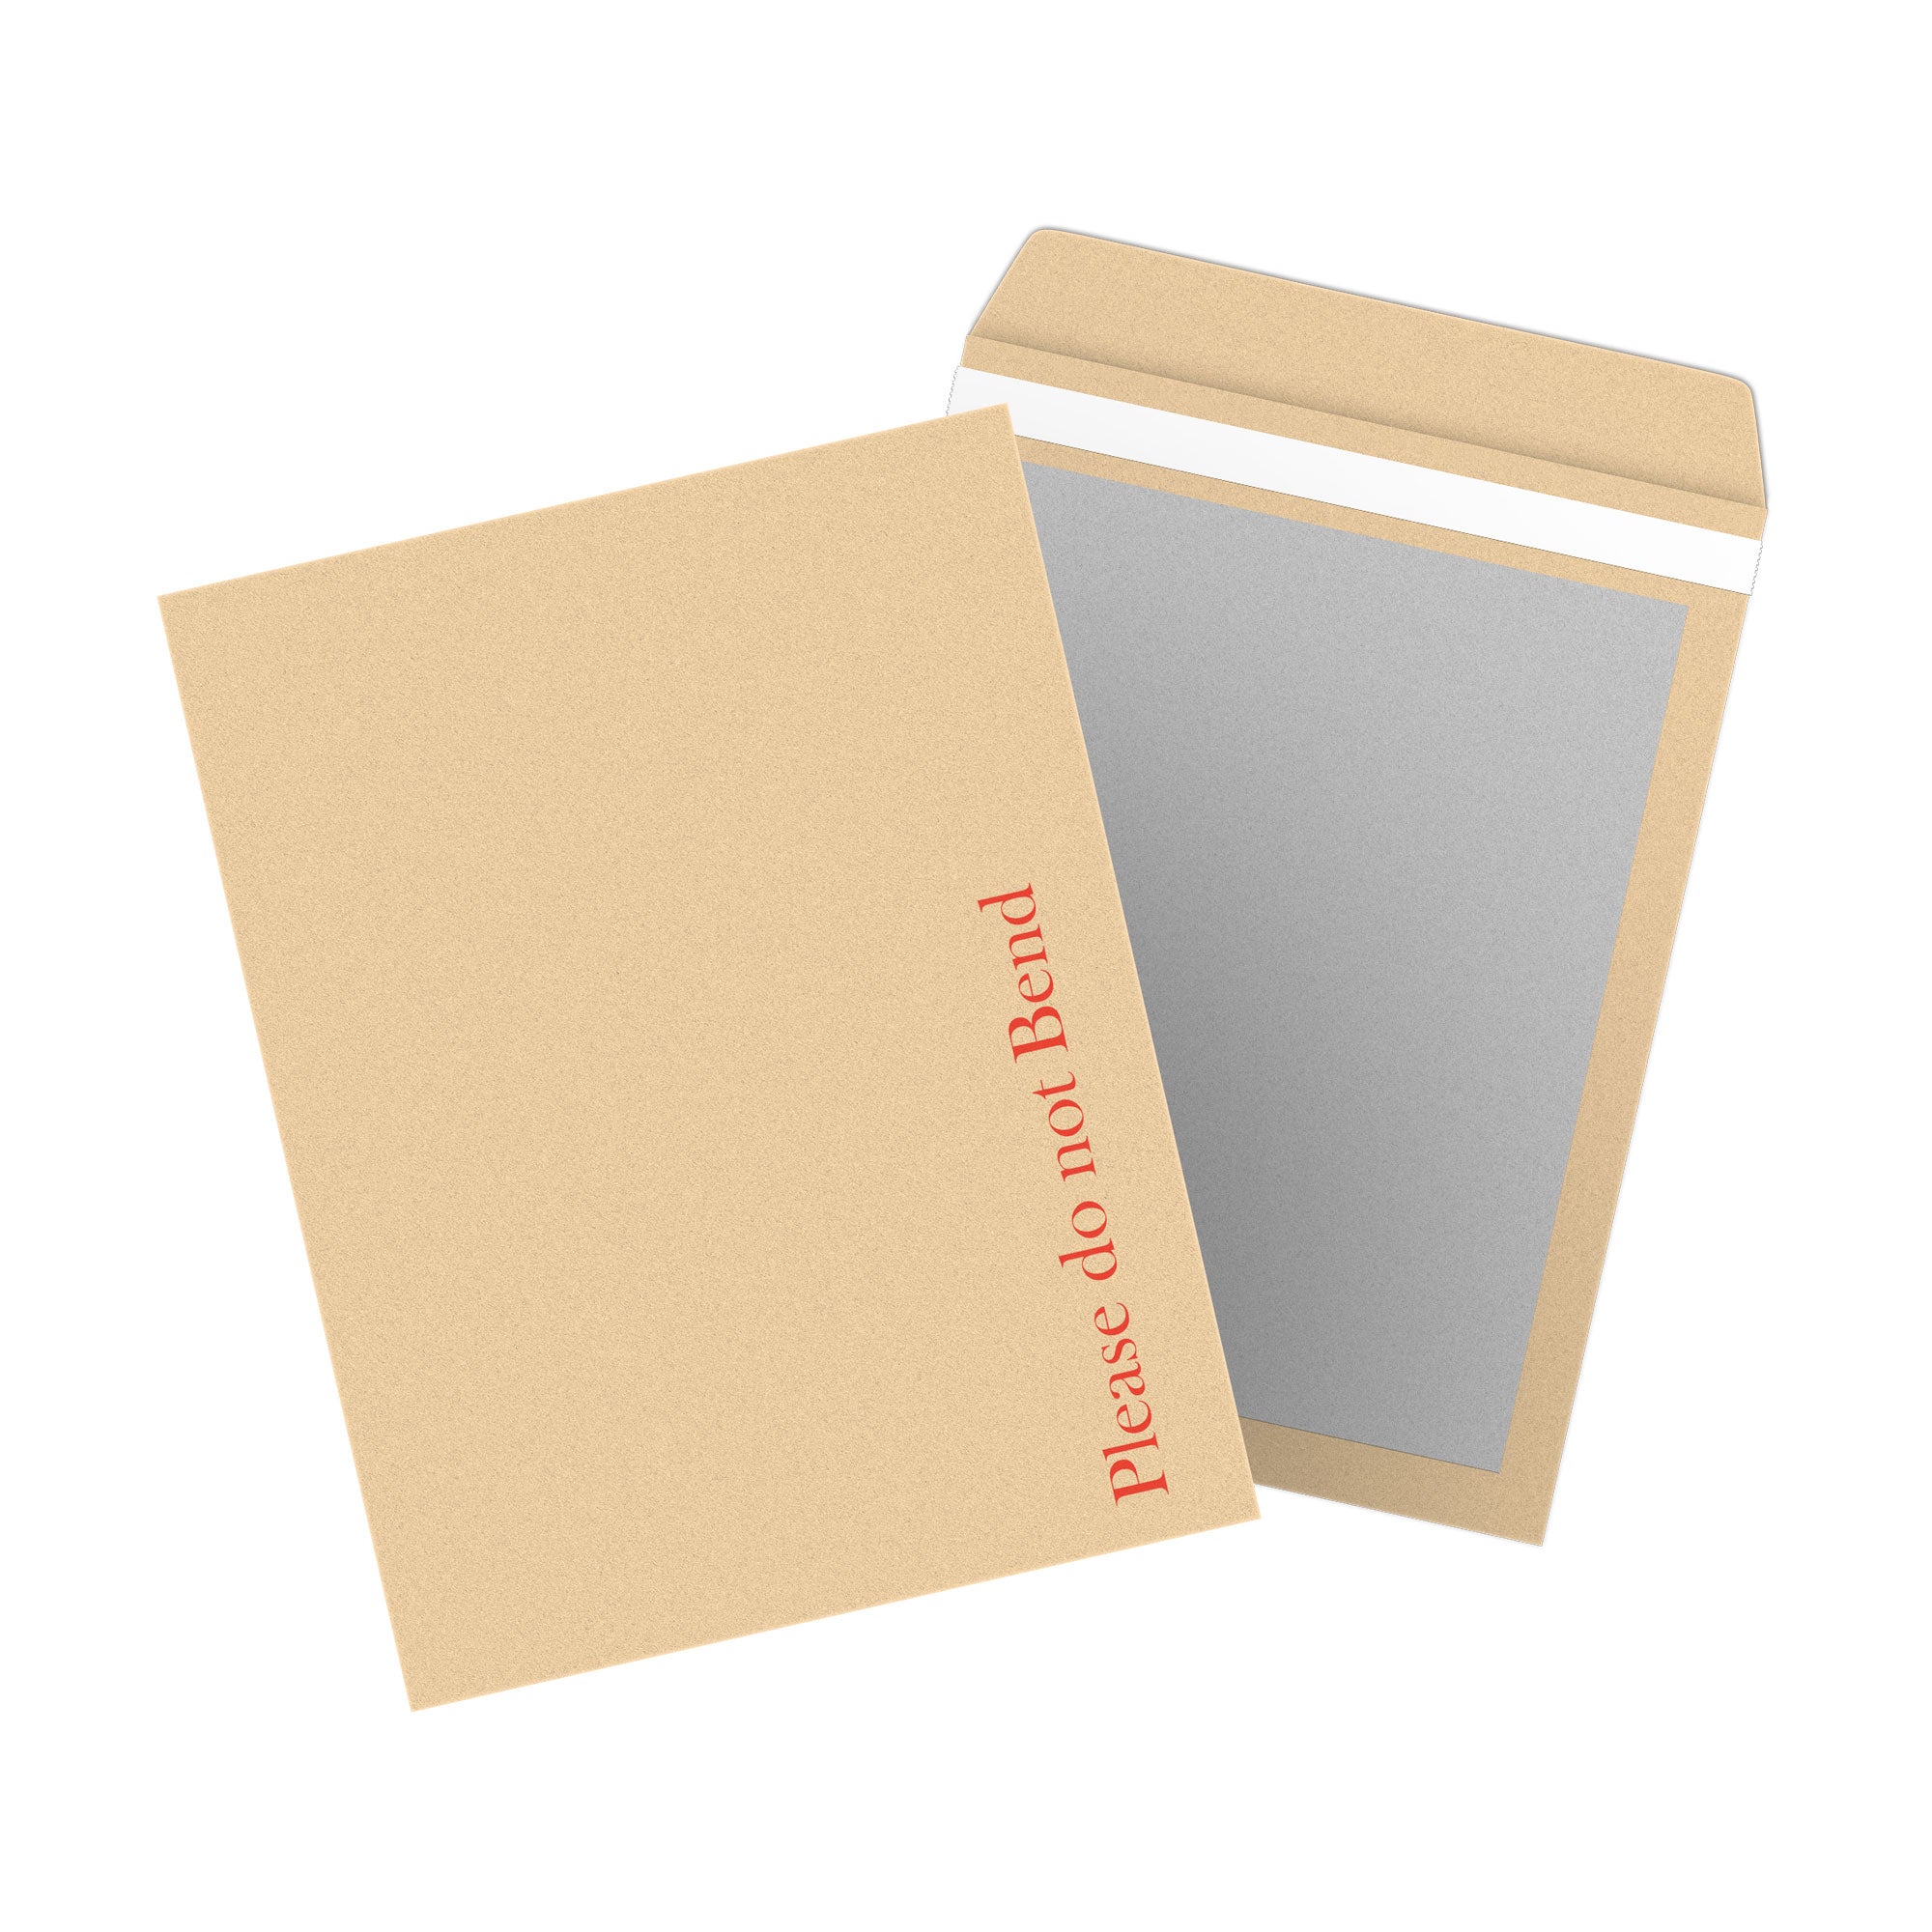 iSoul A3 / A4 / A5 / A6 Do Not Bend Envelopes Manila Hard Board Backed 20 Packs